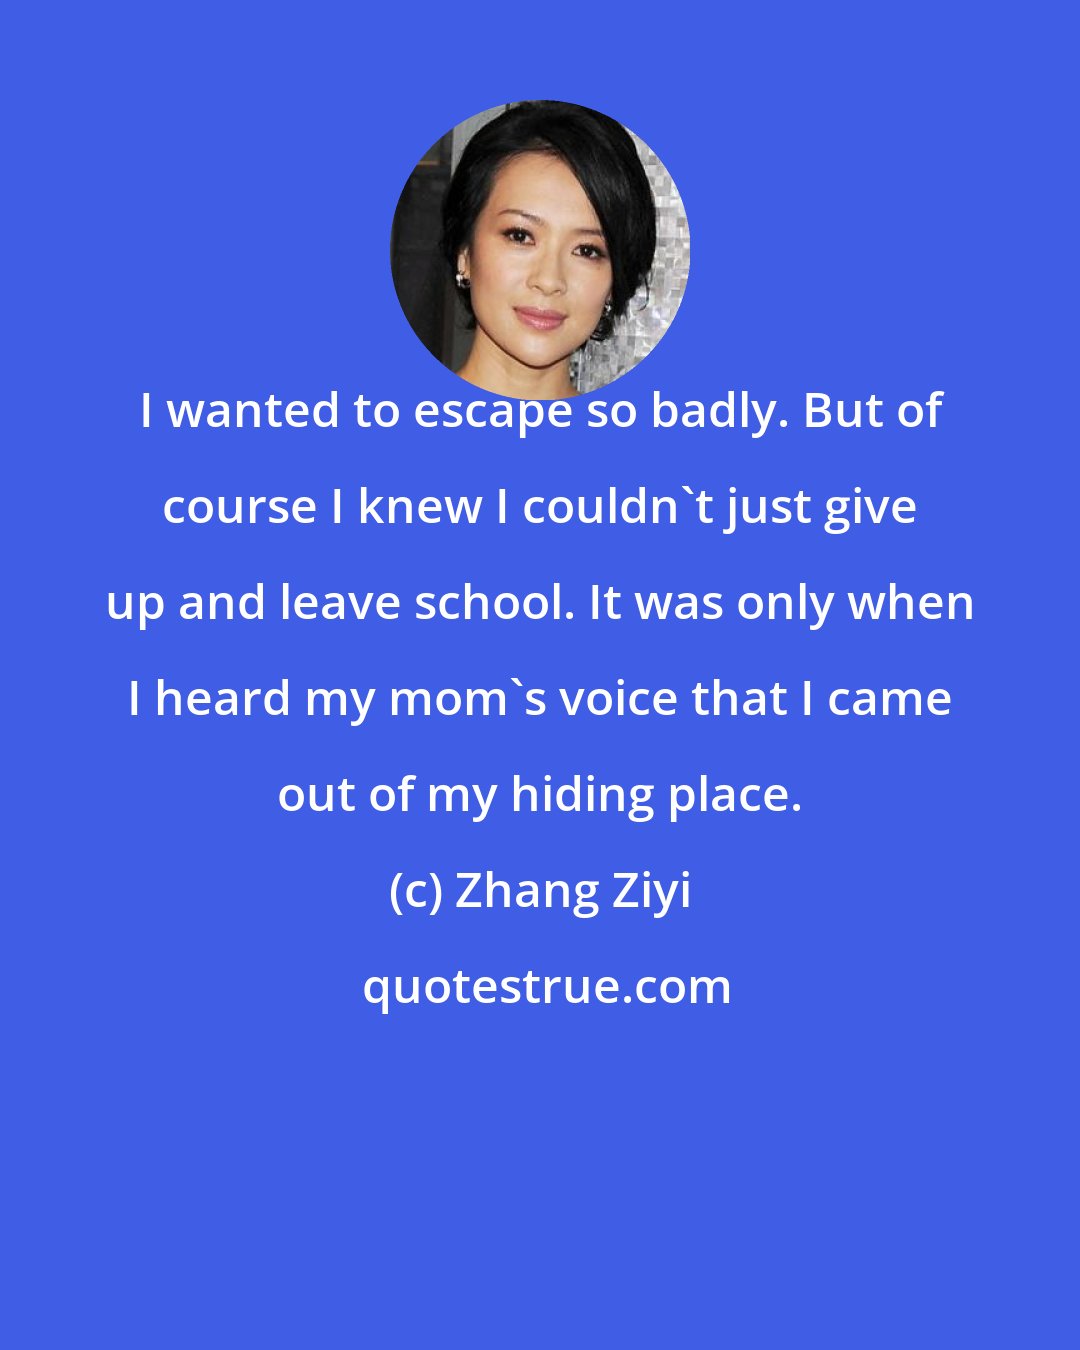 Zhang Ziyi: I wanted to escape so badly. But of course I knew I couldn't just give up and leave school. It was only when I heard my mom's voice that I came out of my hiding place.